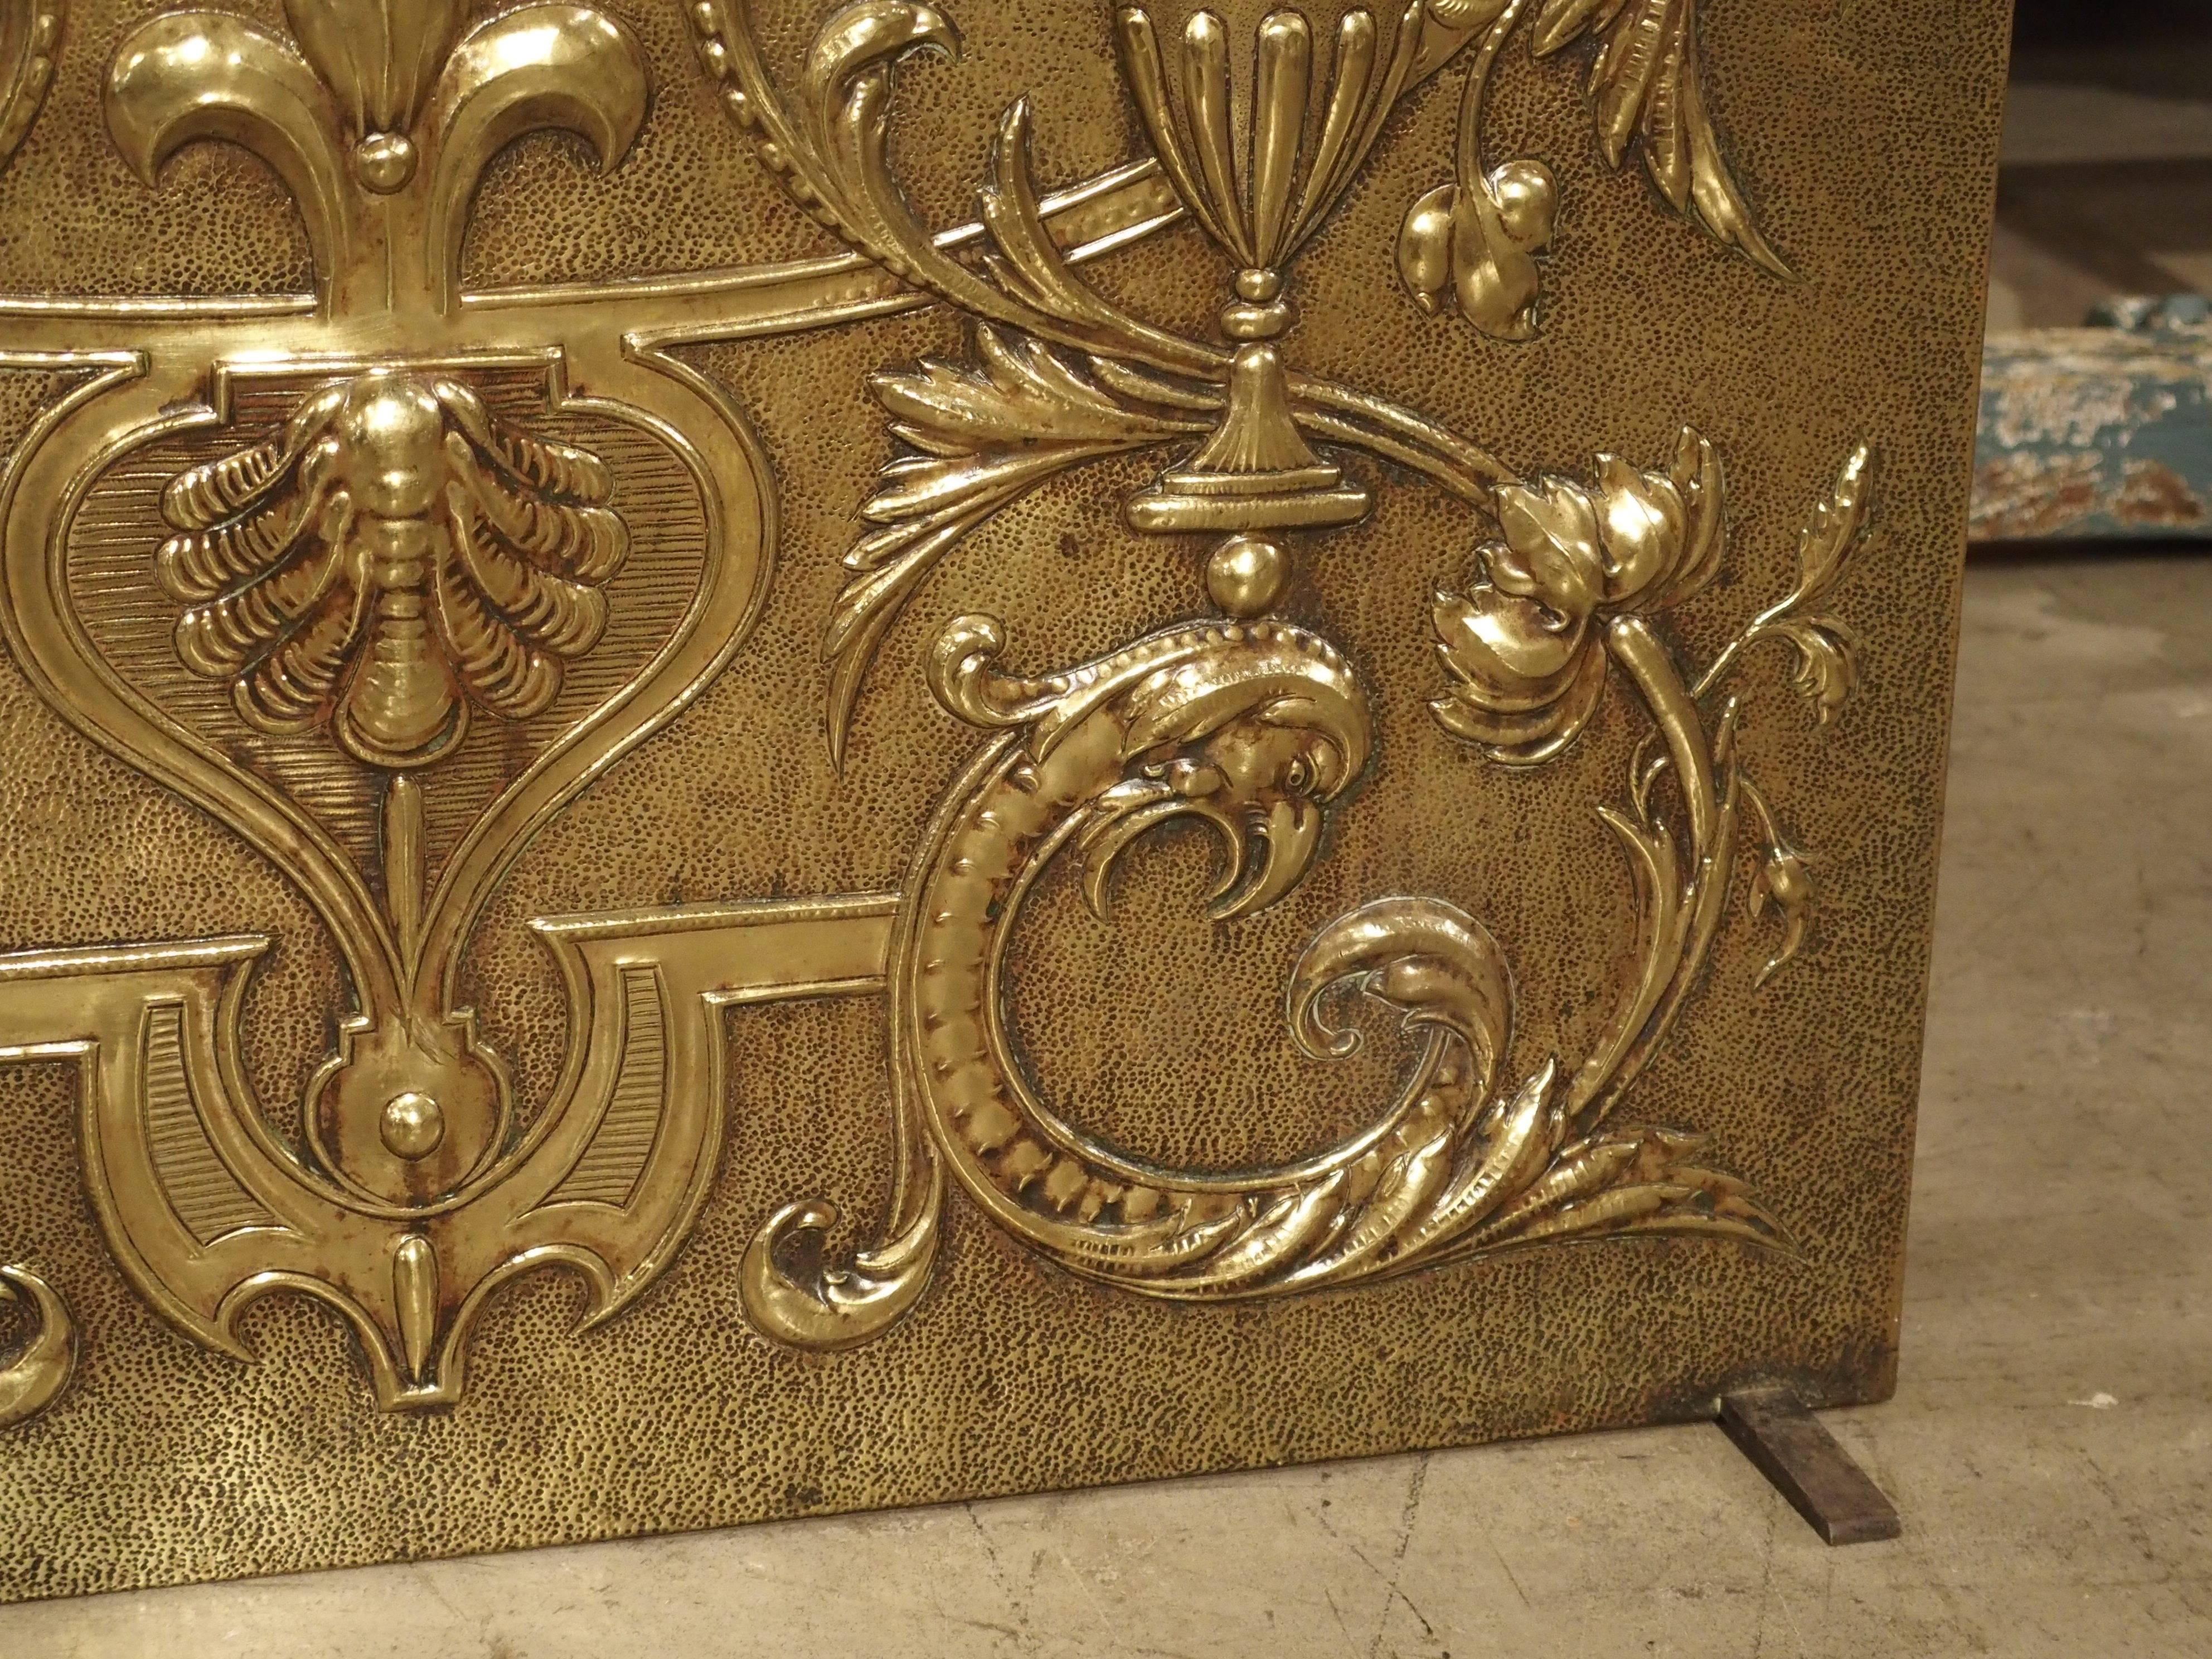 From France, this unique brass repousse fireplace screen has been exquisitely designed. Large motifs of fantastical flying animals bodies extend into the upper corners. The lower corners are half-figures of birds with leaves and flowers for their